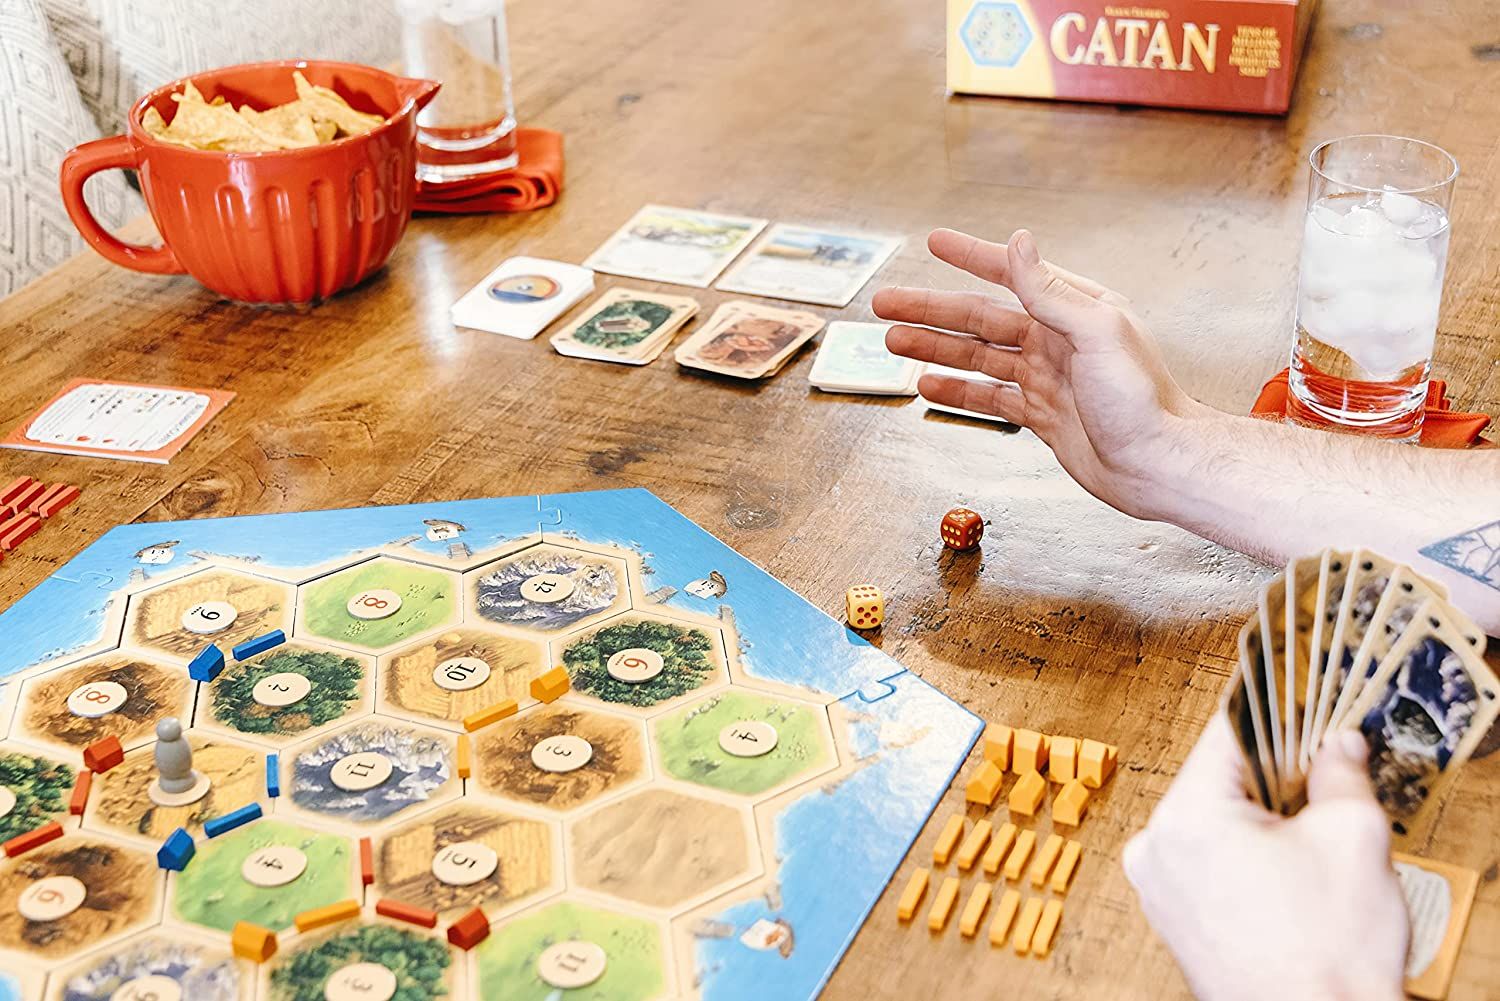 Catan is one of the best legacy board games